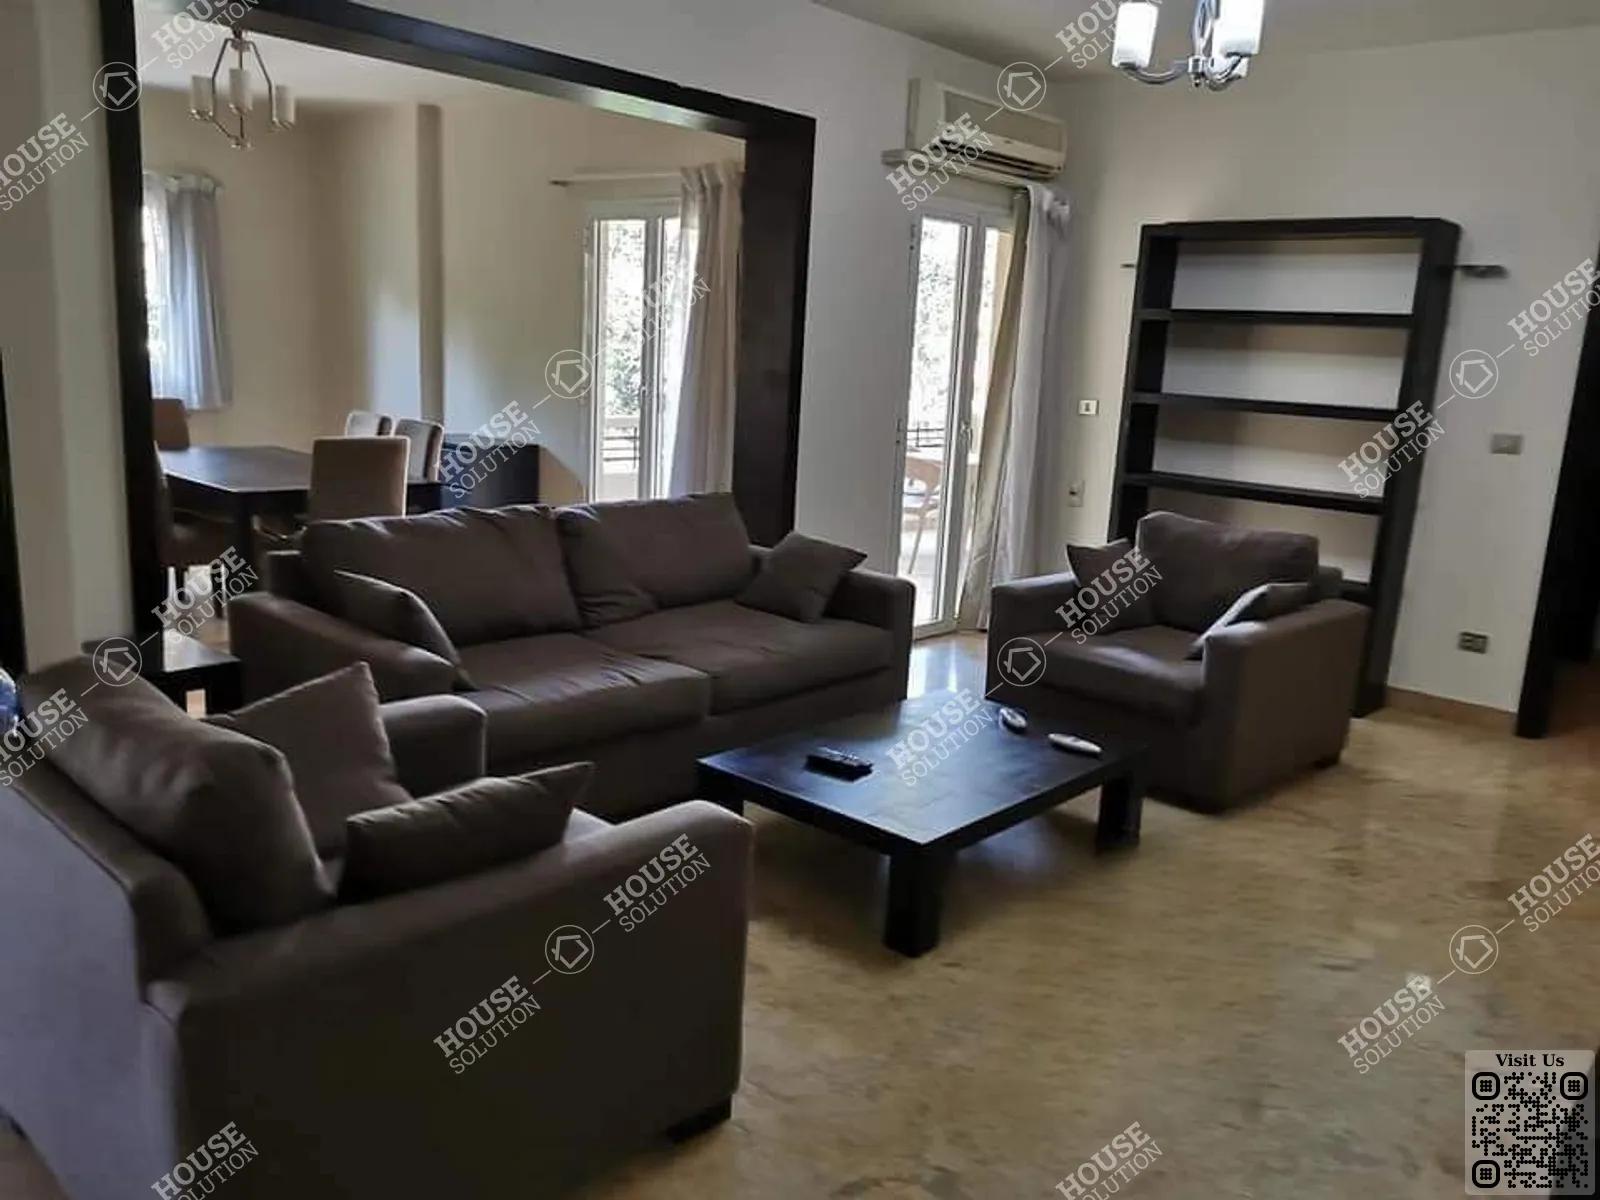 RECEPTION  @ Apartments For Rent In Maadi Maadi Degla Area: 200 m² consists of 3 Bedrooms 2 Bathrooms Modern furnished 5 stars #4504-0